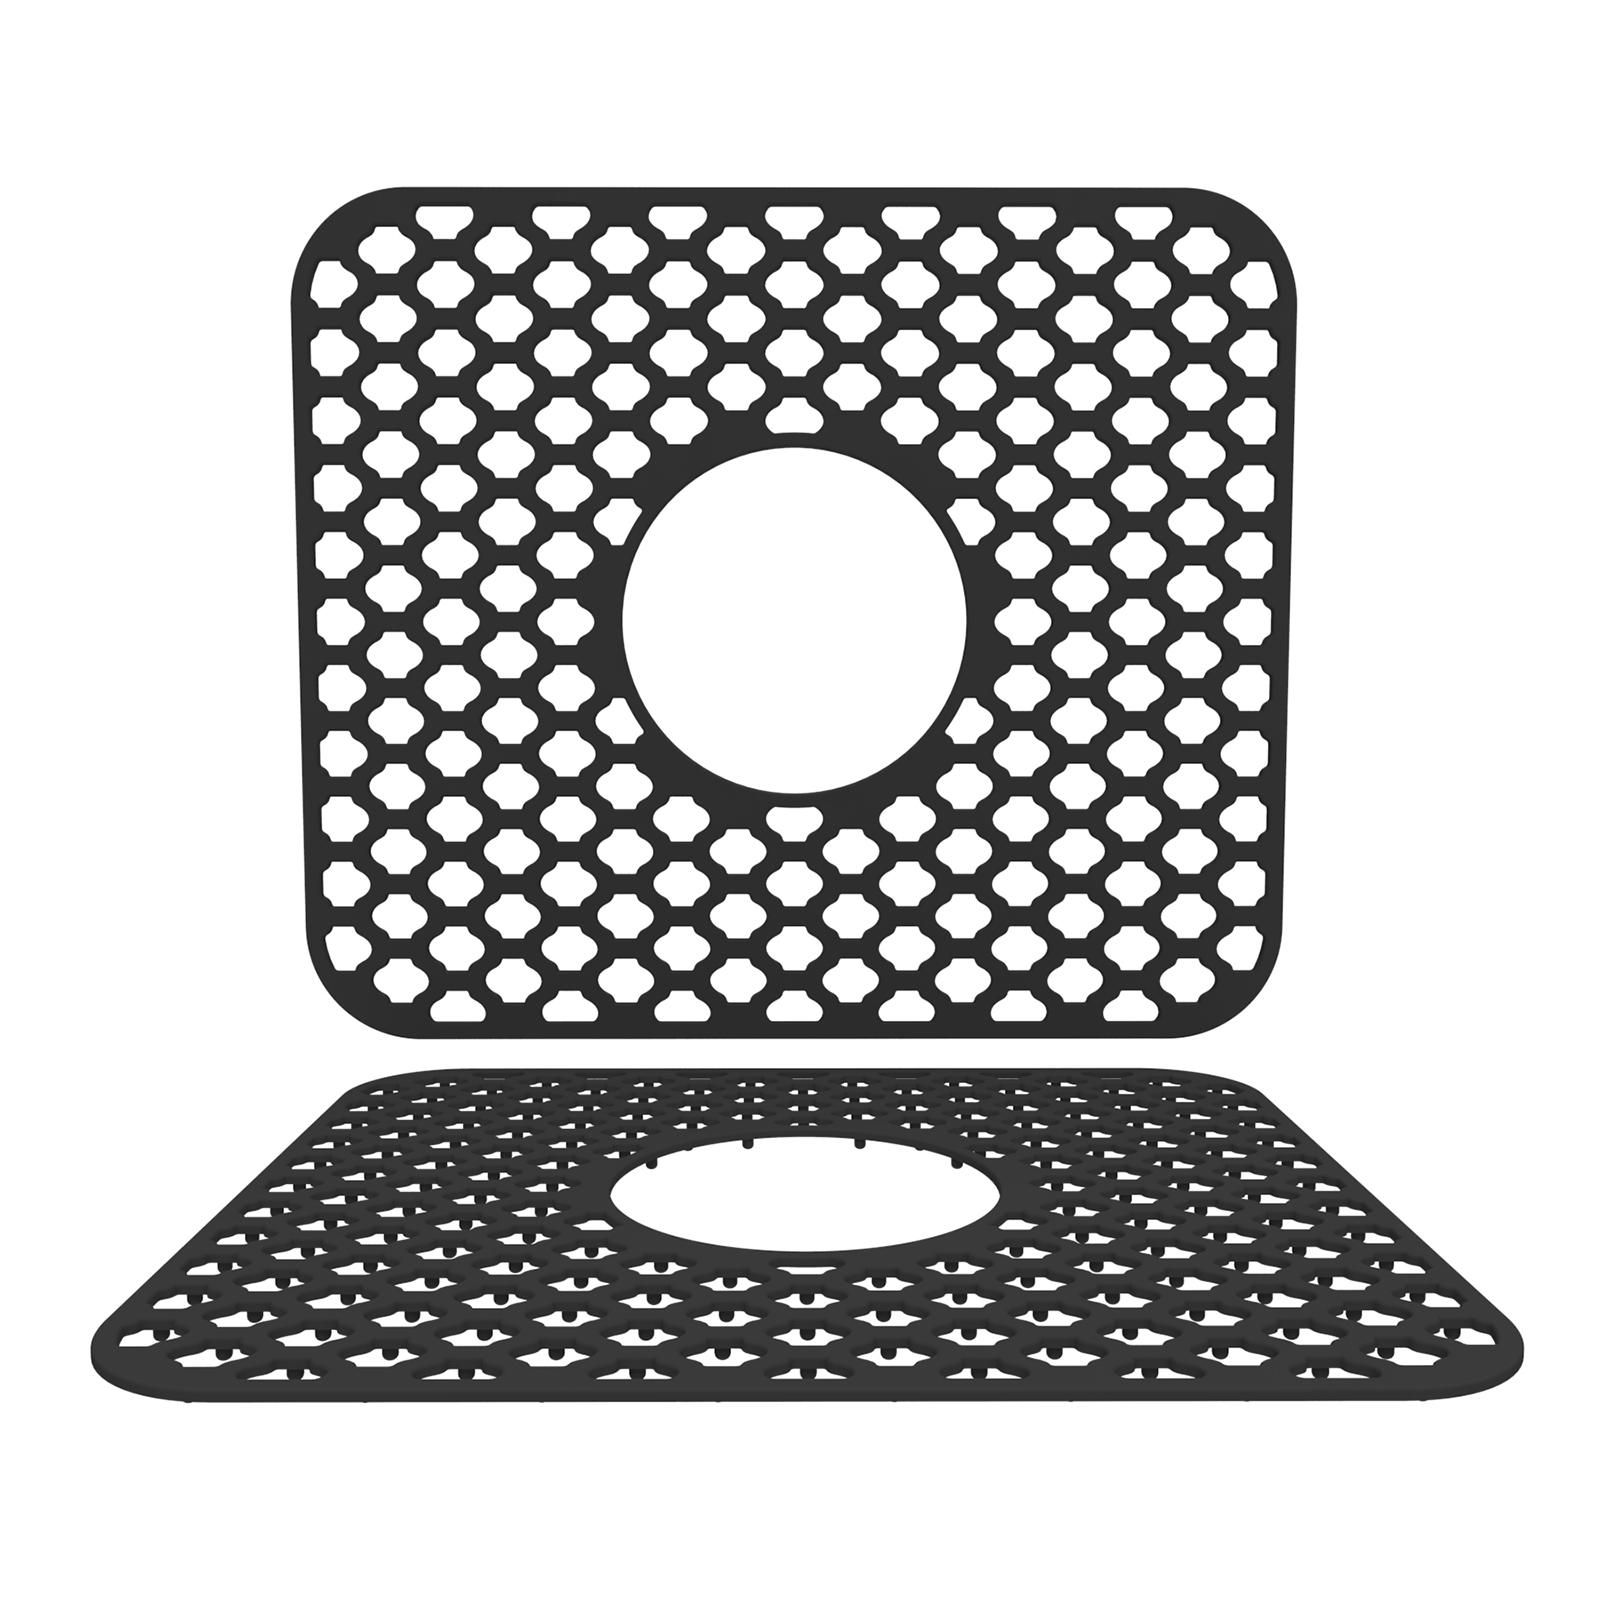 TOOVEM A Family of Manufacturers Silicone Sink Mat 2pcs TOOVEM Sink Protectors for Kitchen Sink, Sink Mat Grid Non-Slip Folding Sink for Bottom of